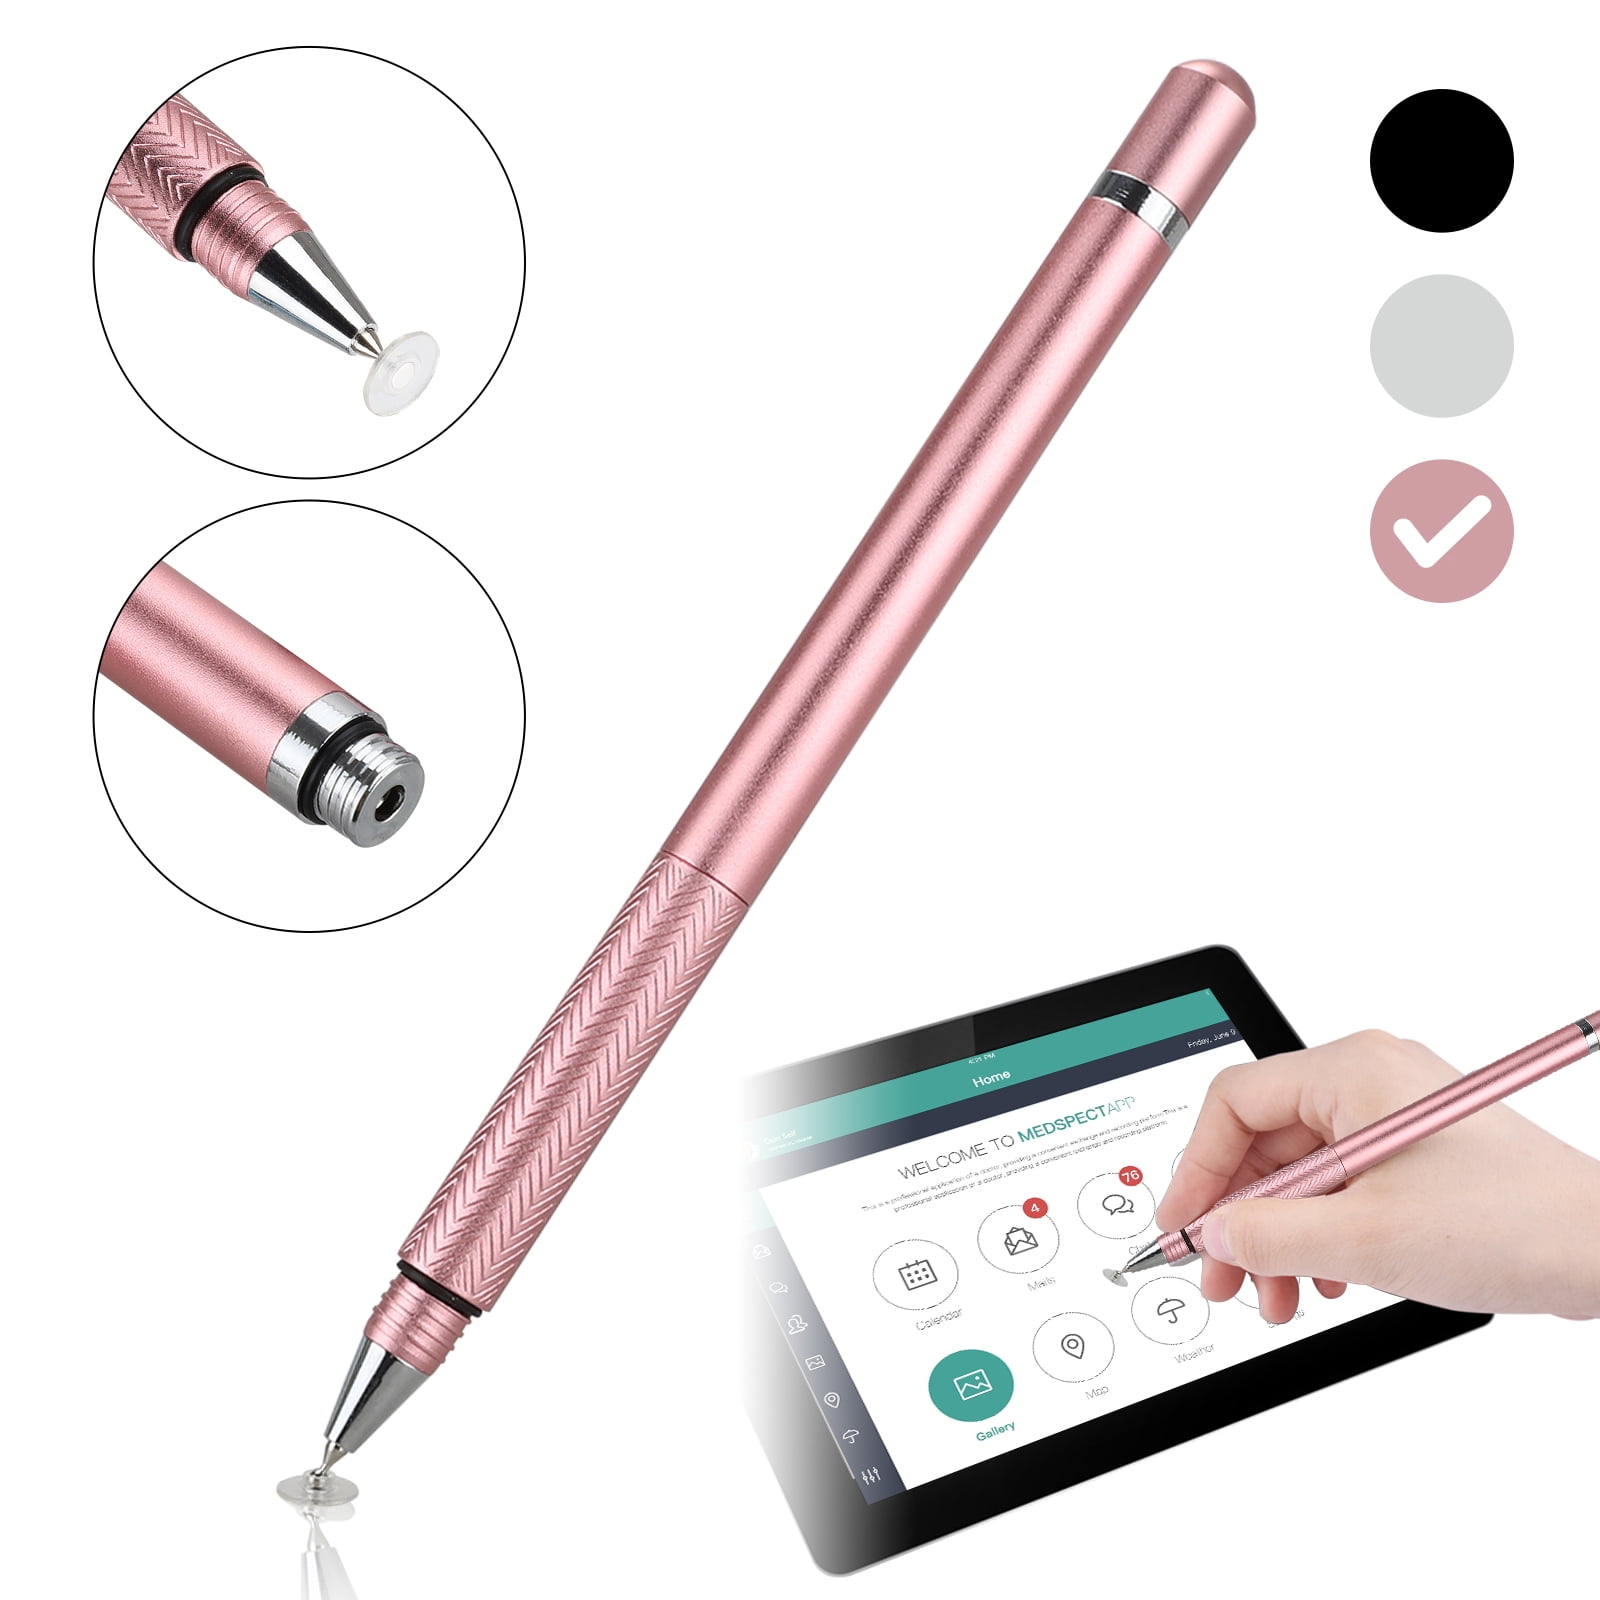 GC 3Pcs Universal Phone Tablet Touch Screen Pen Stylus for Android iPhone iPad 